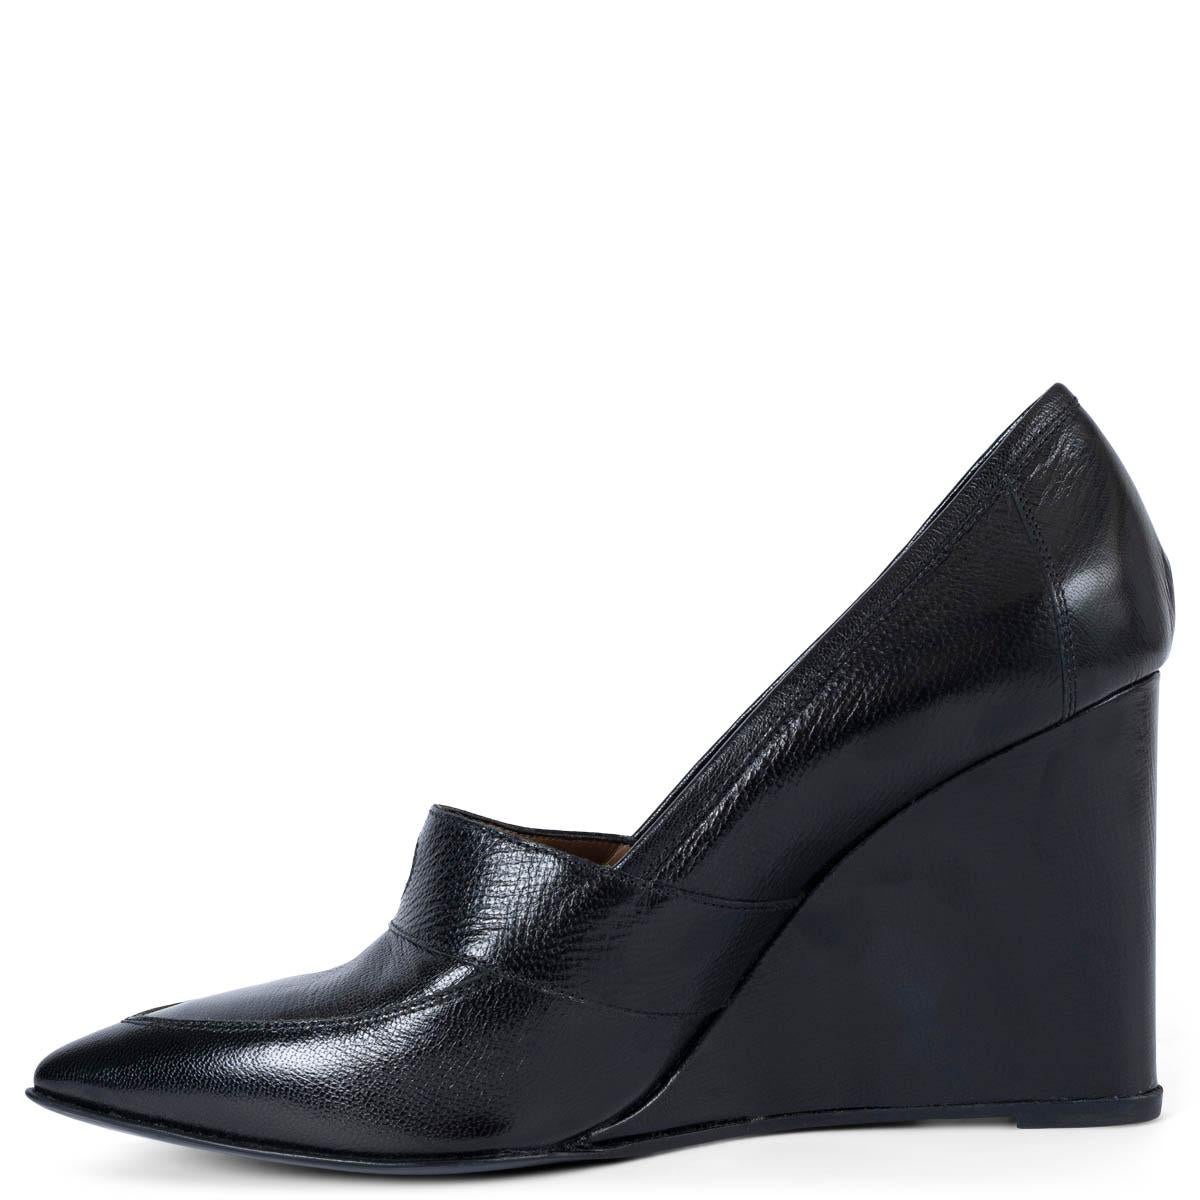 HERMES black leather POINTED TOE WEDGE Pumps Shoes 39 In Excellent Condition For Sale In Zürich, CH